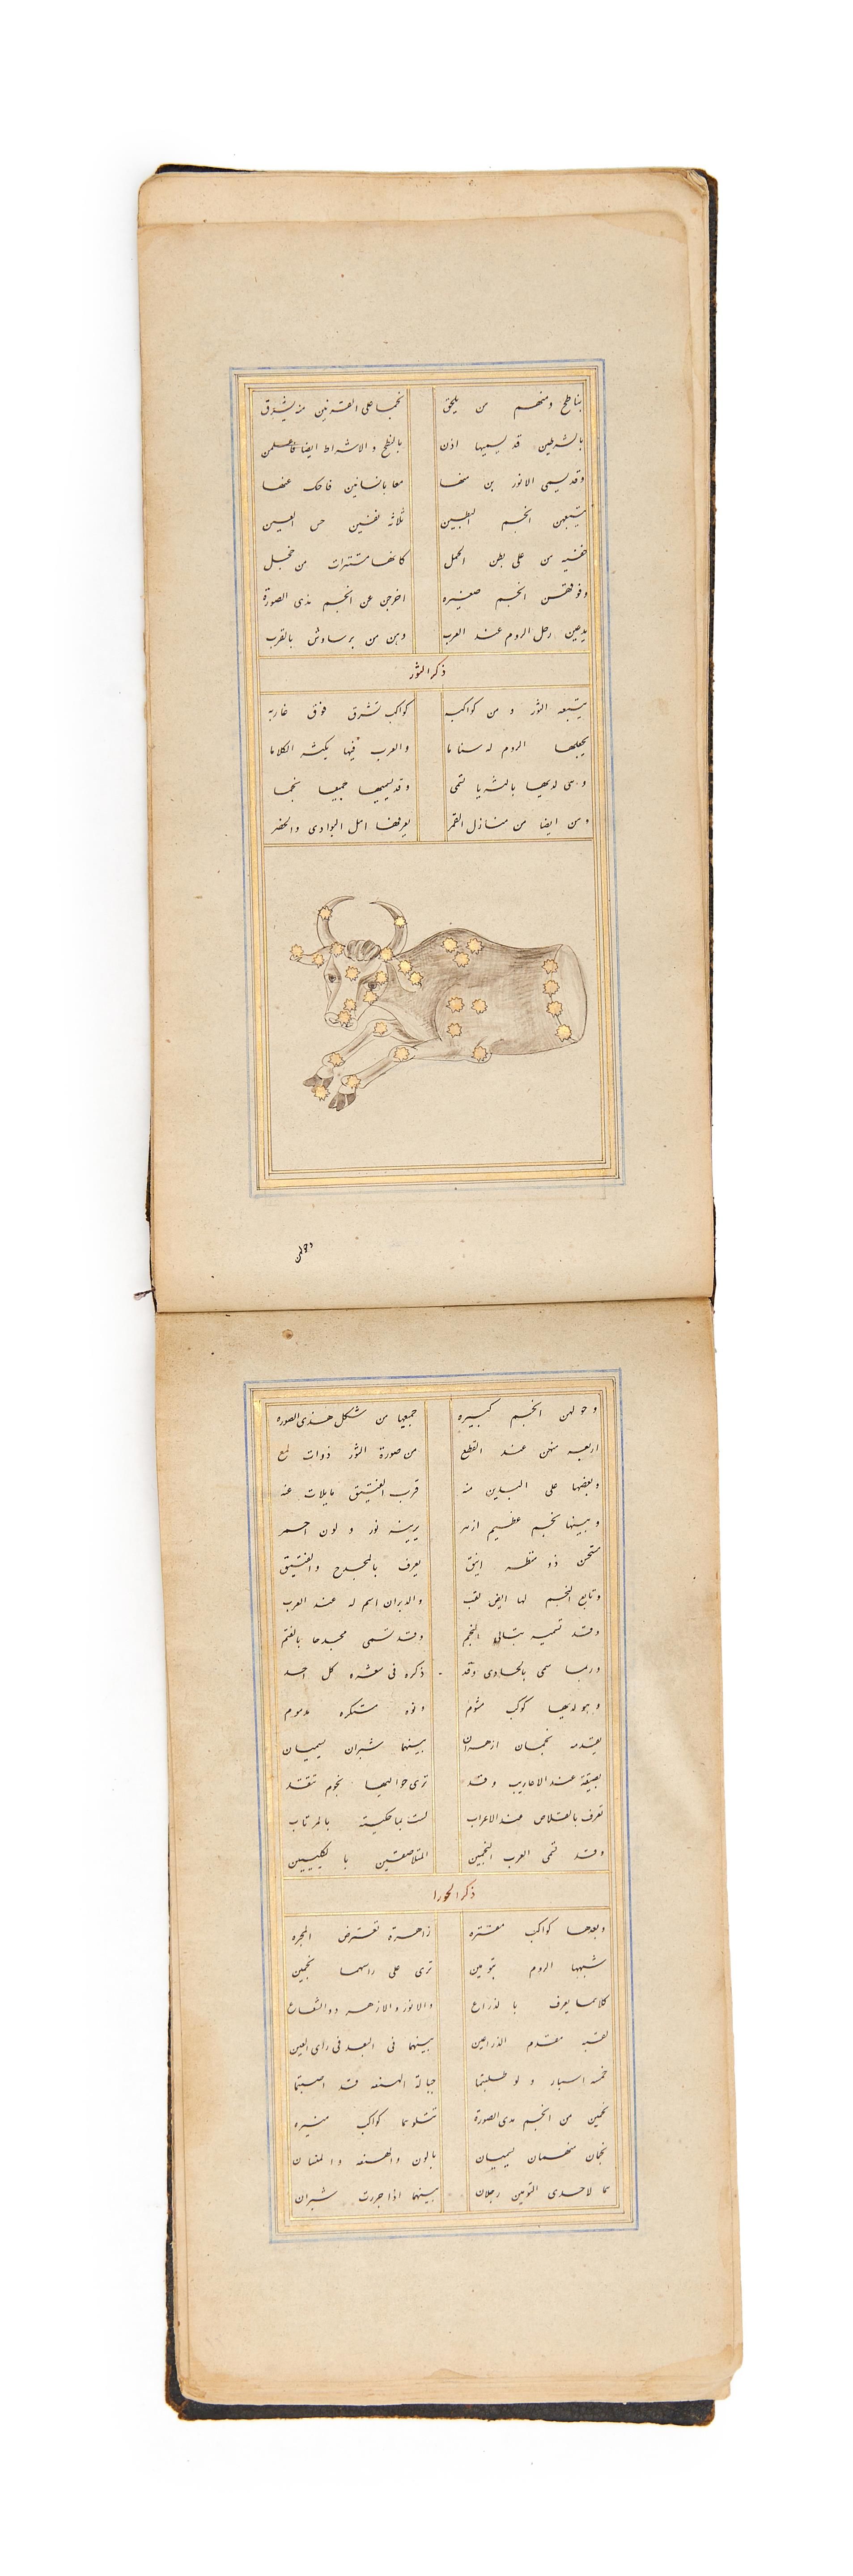 A RARE ILLUMINATED & ILLUSTRATED PERSIAN POETRY BOOK, ABD AL RAHMAN IN SUFI TEXT, LATE 17TH/ EARLY - Image 27 of 34